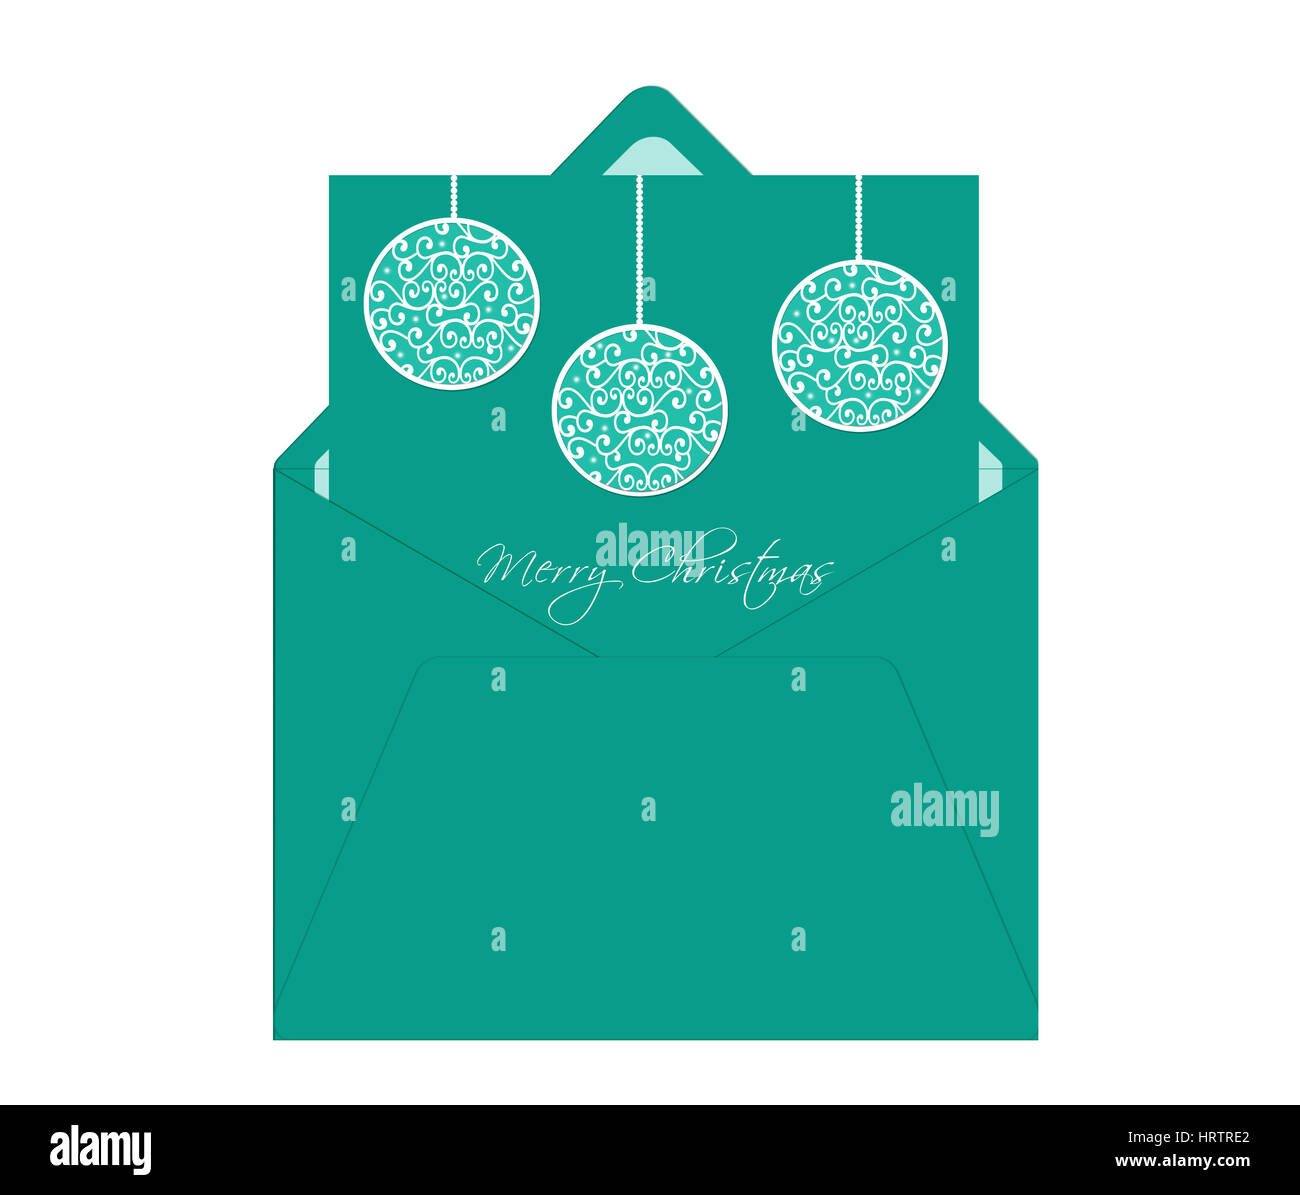 Merry Christmas Card with Envelope and ball ornaments in green color Stock Photo